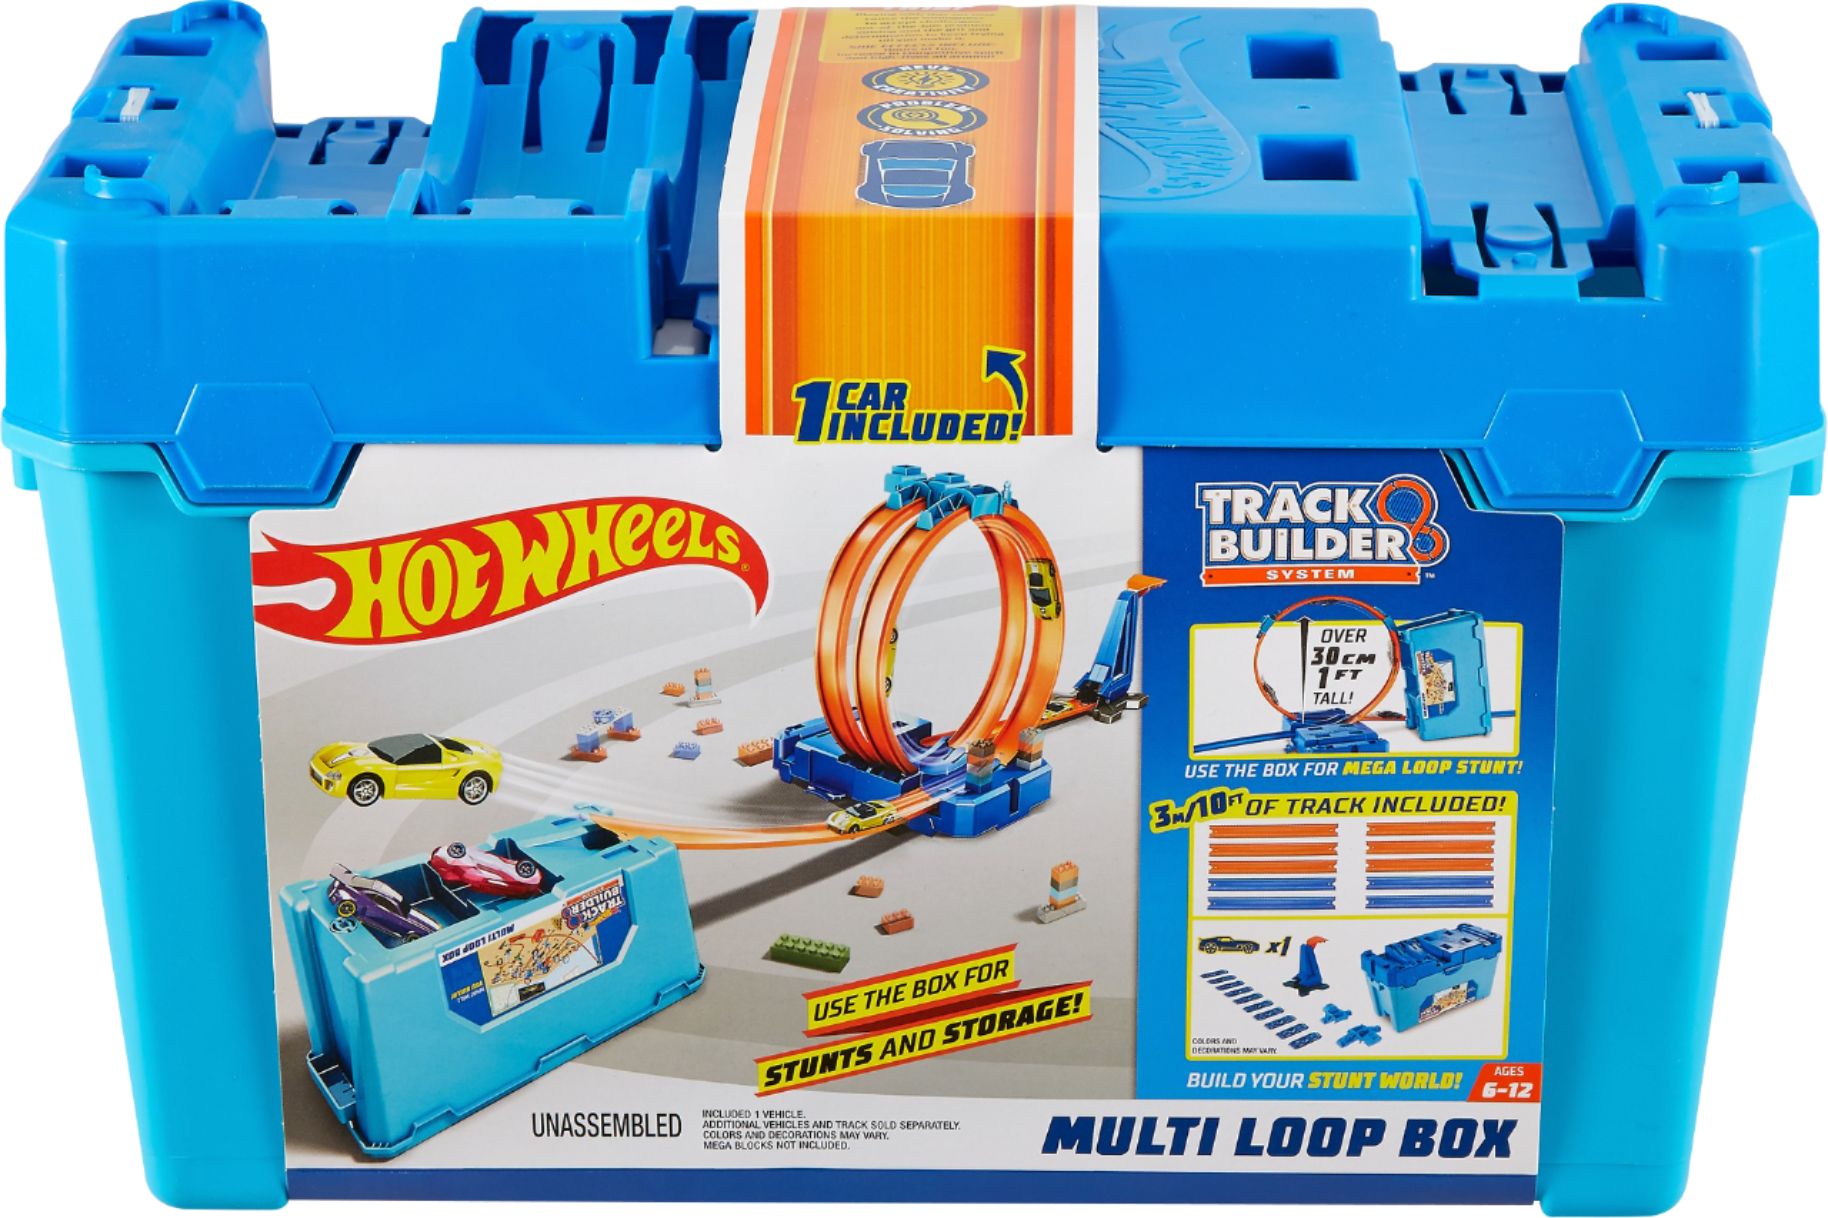 Hot Wheels Car Vehicle Track Builder Stunt Box Birthday Party Game Toy Gift 